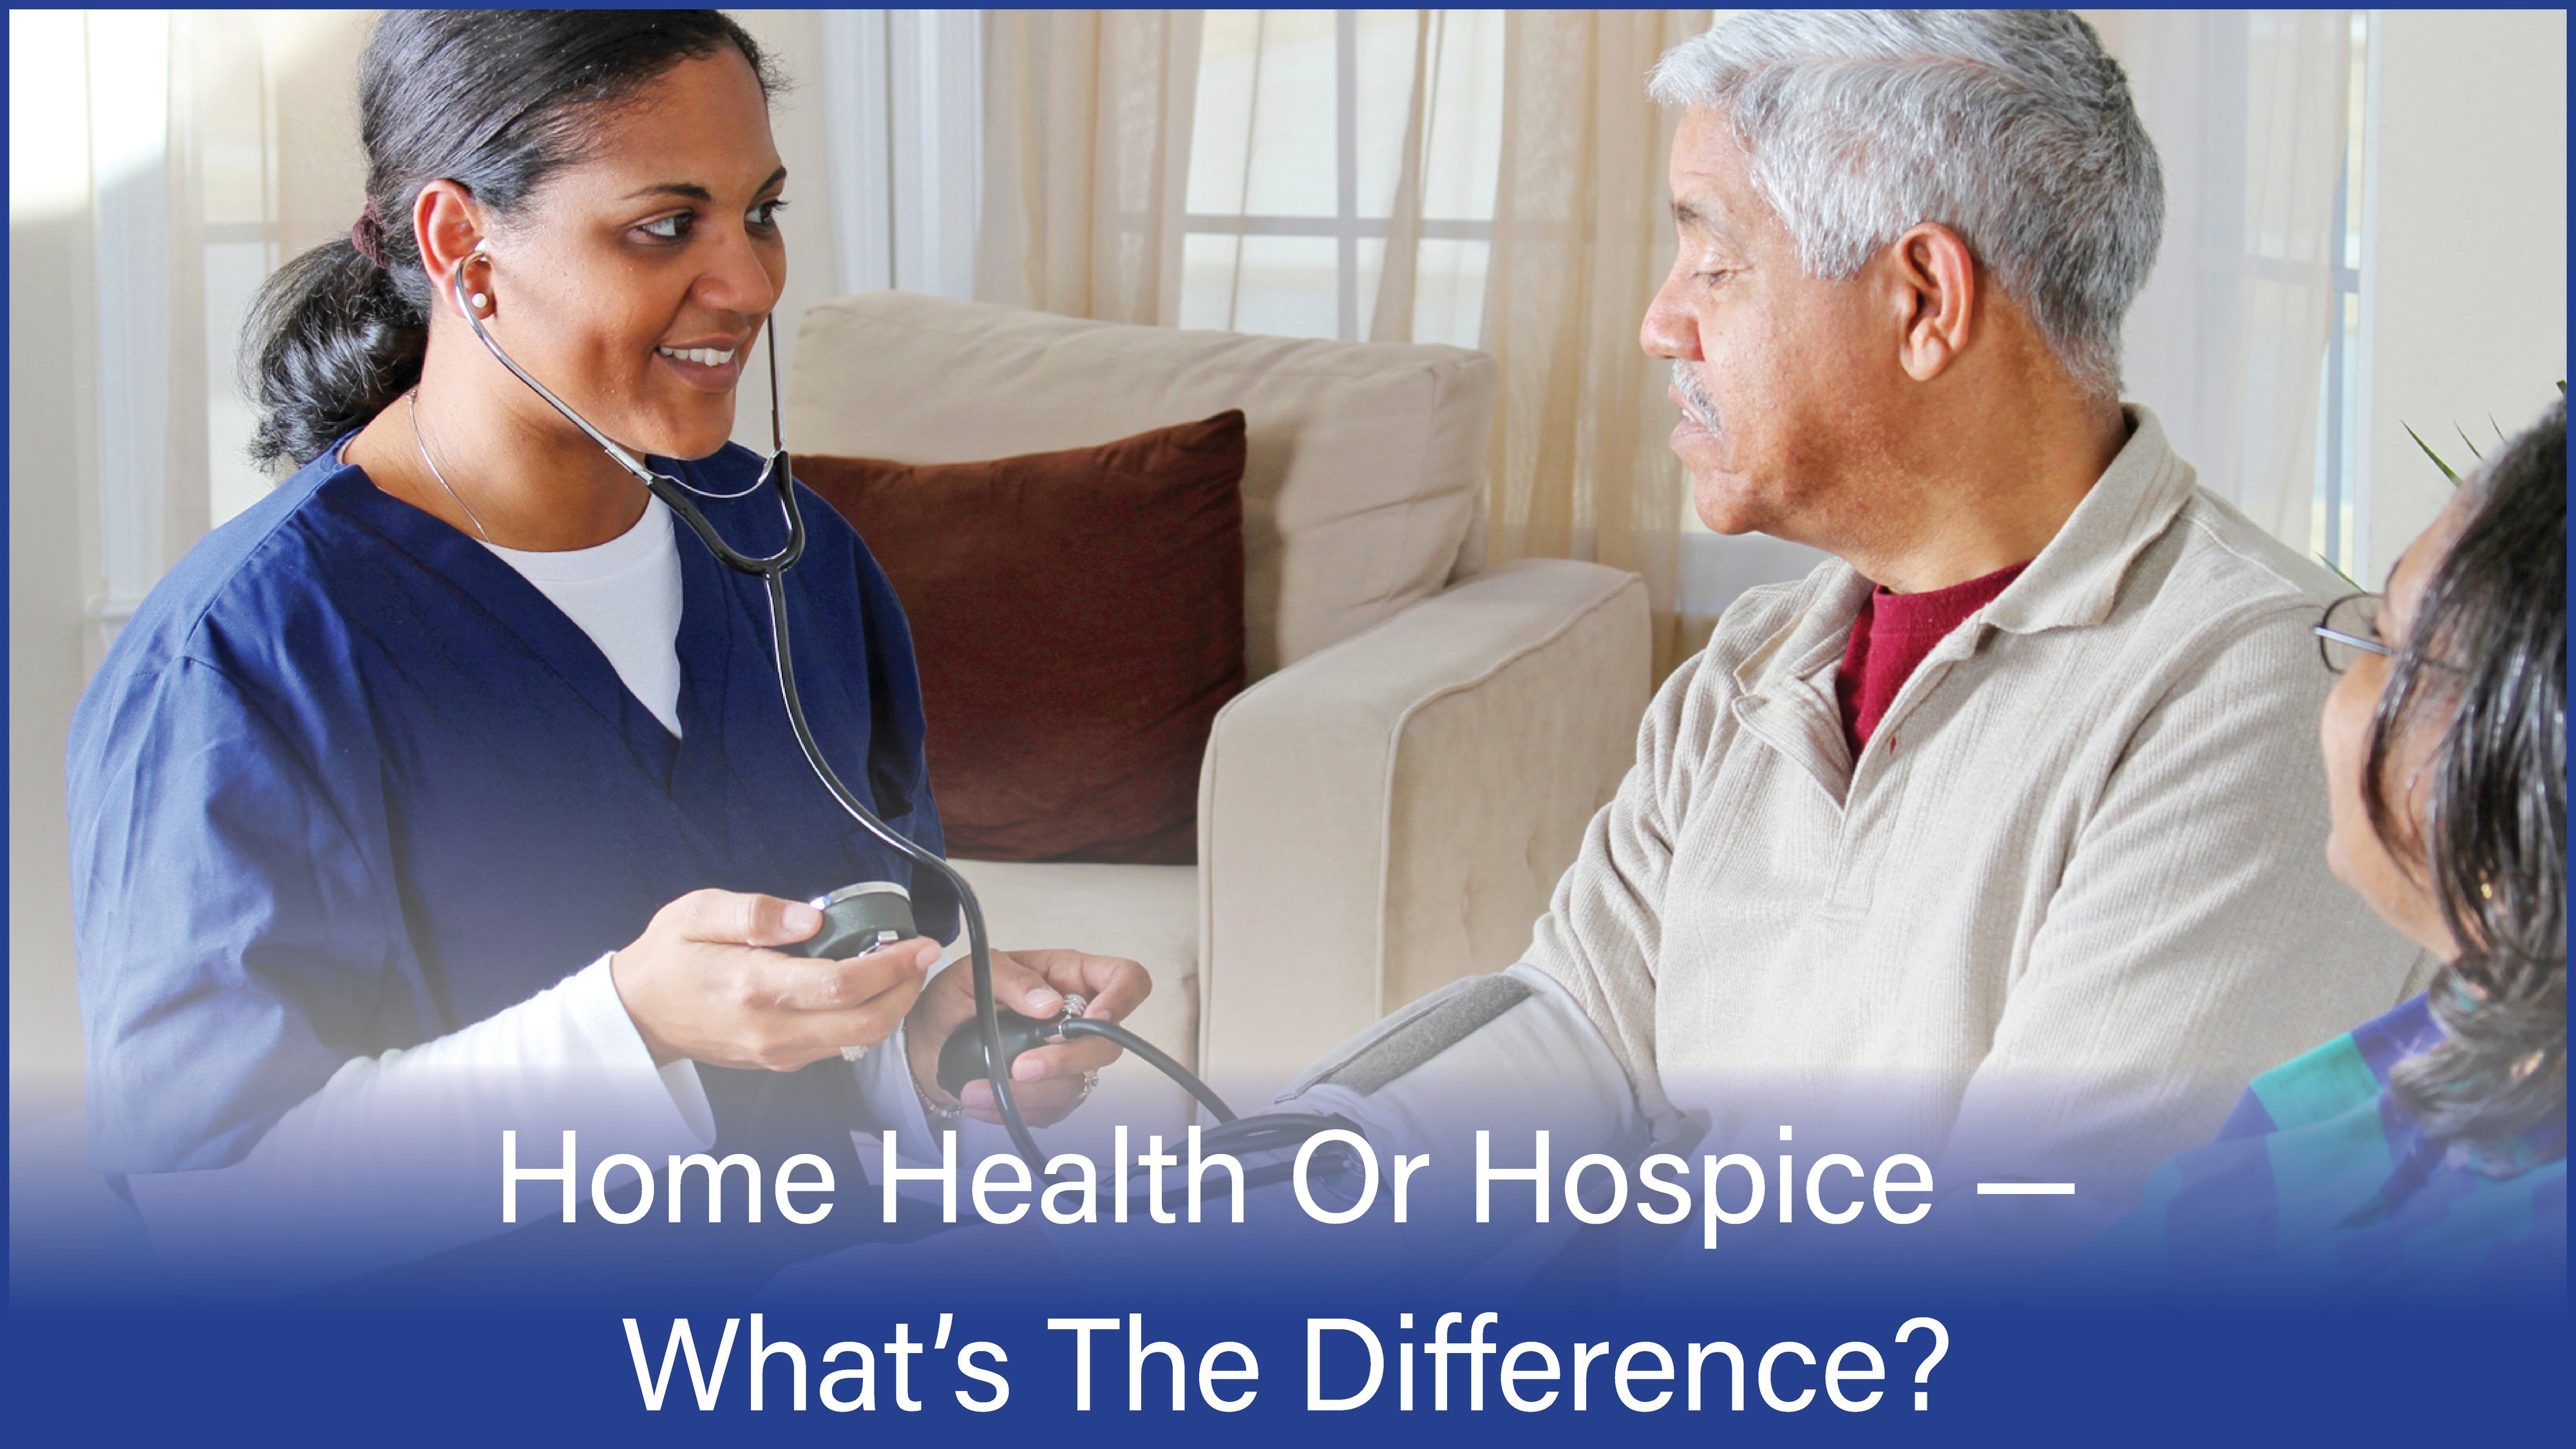 Home Health Or Hospice — What's The Difference?